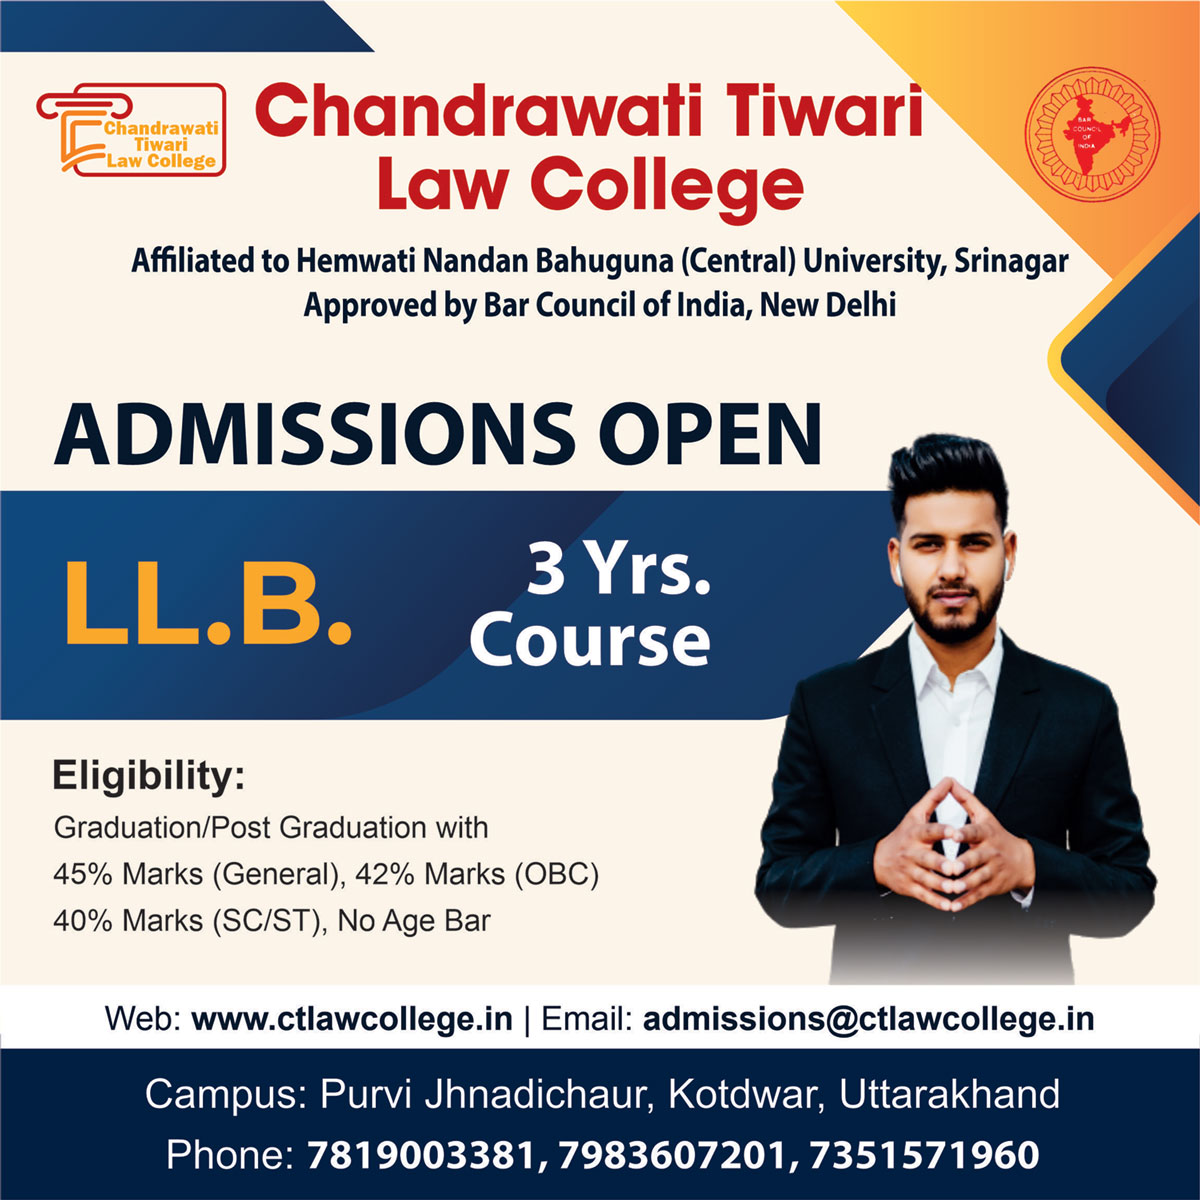 Admissions Open Graphic for Chandrawati Tiwari Law College